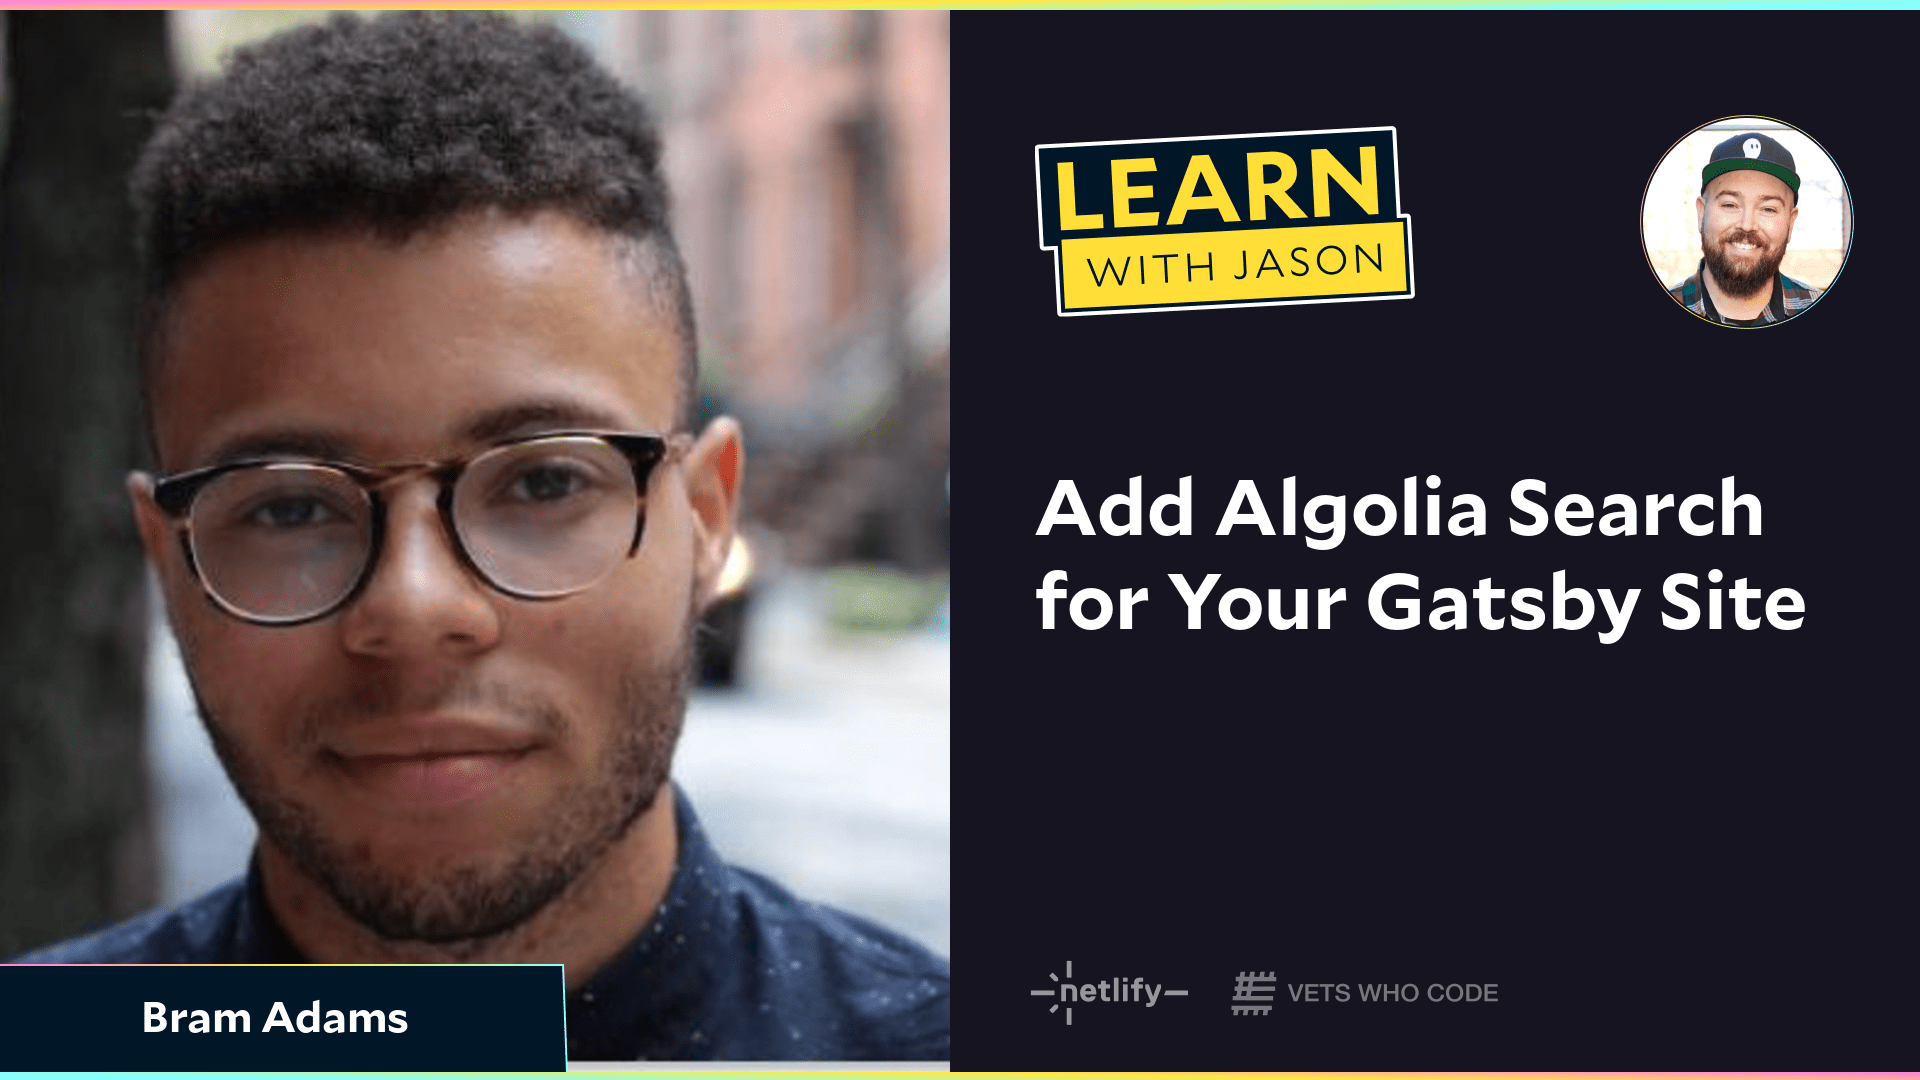 Add Algolia Search for Your Gatsby Site (with Bram Adams)